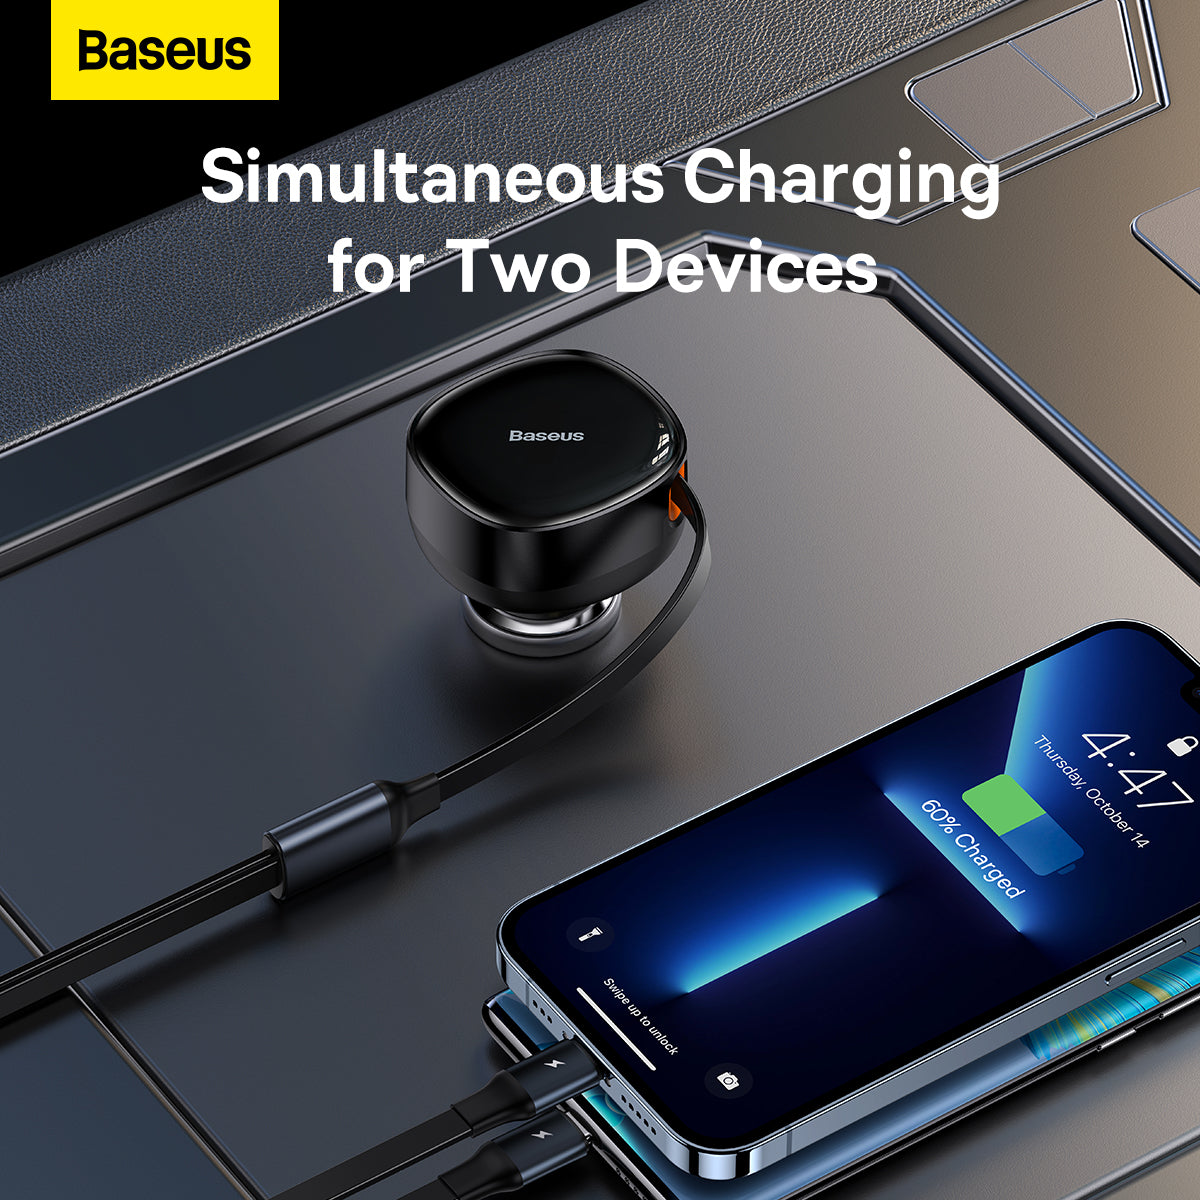 Baseus Enjoyment Series Retractable 2-in-1 30W Car Charger